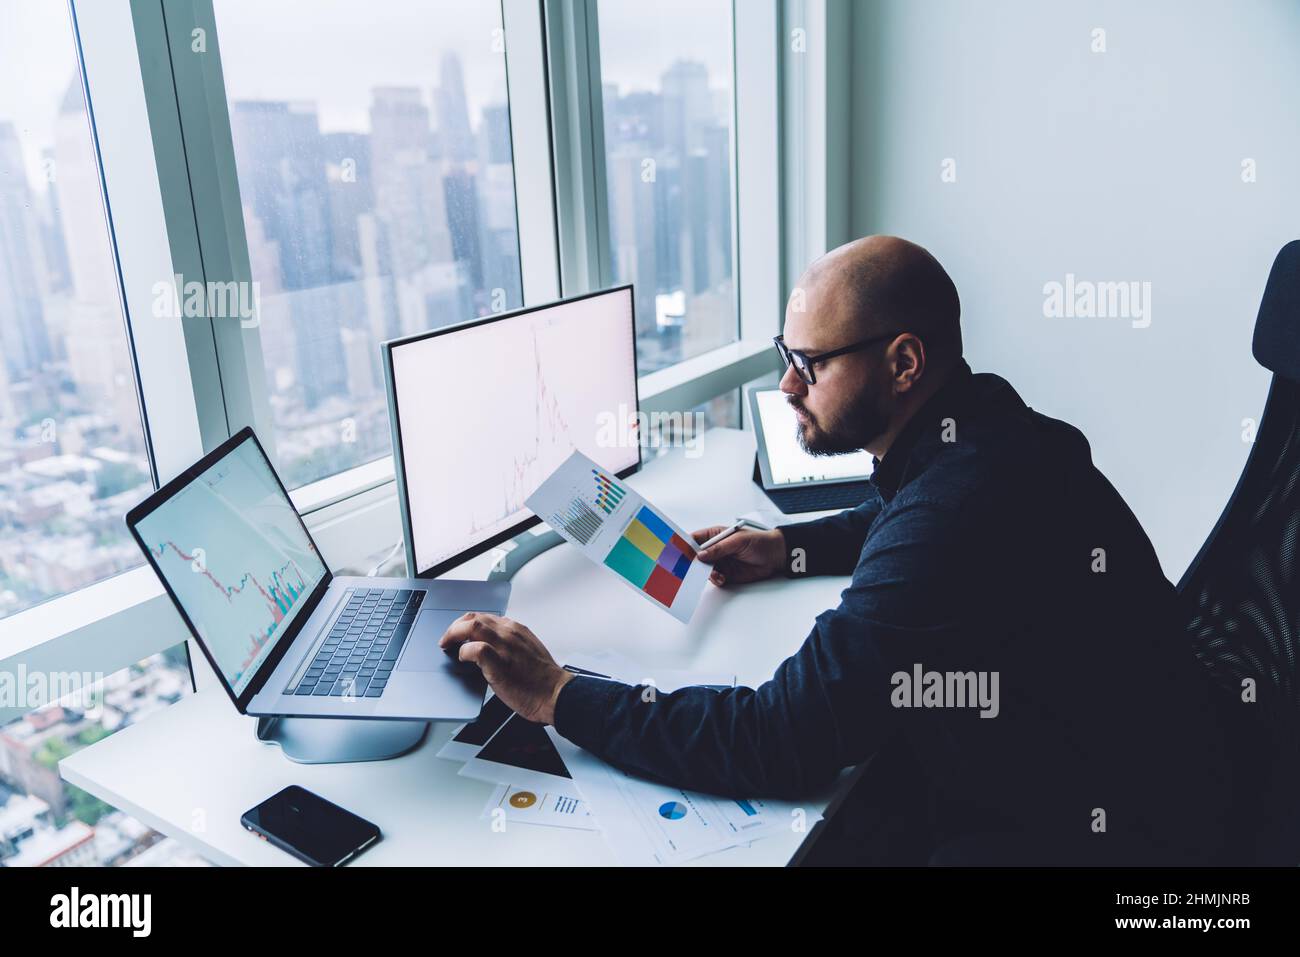 Focused male analyst working on laptop in modern workspace Stock Photo